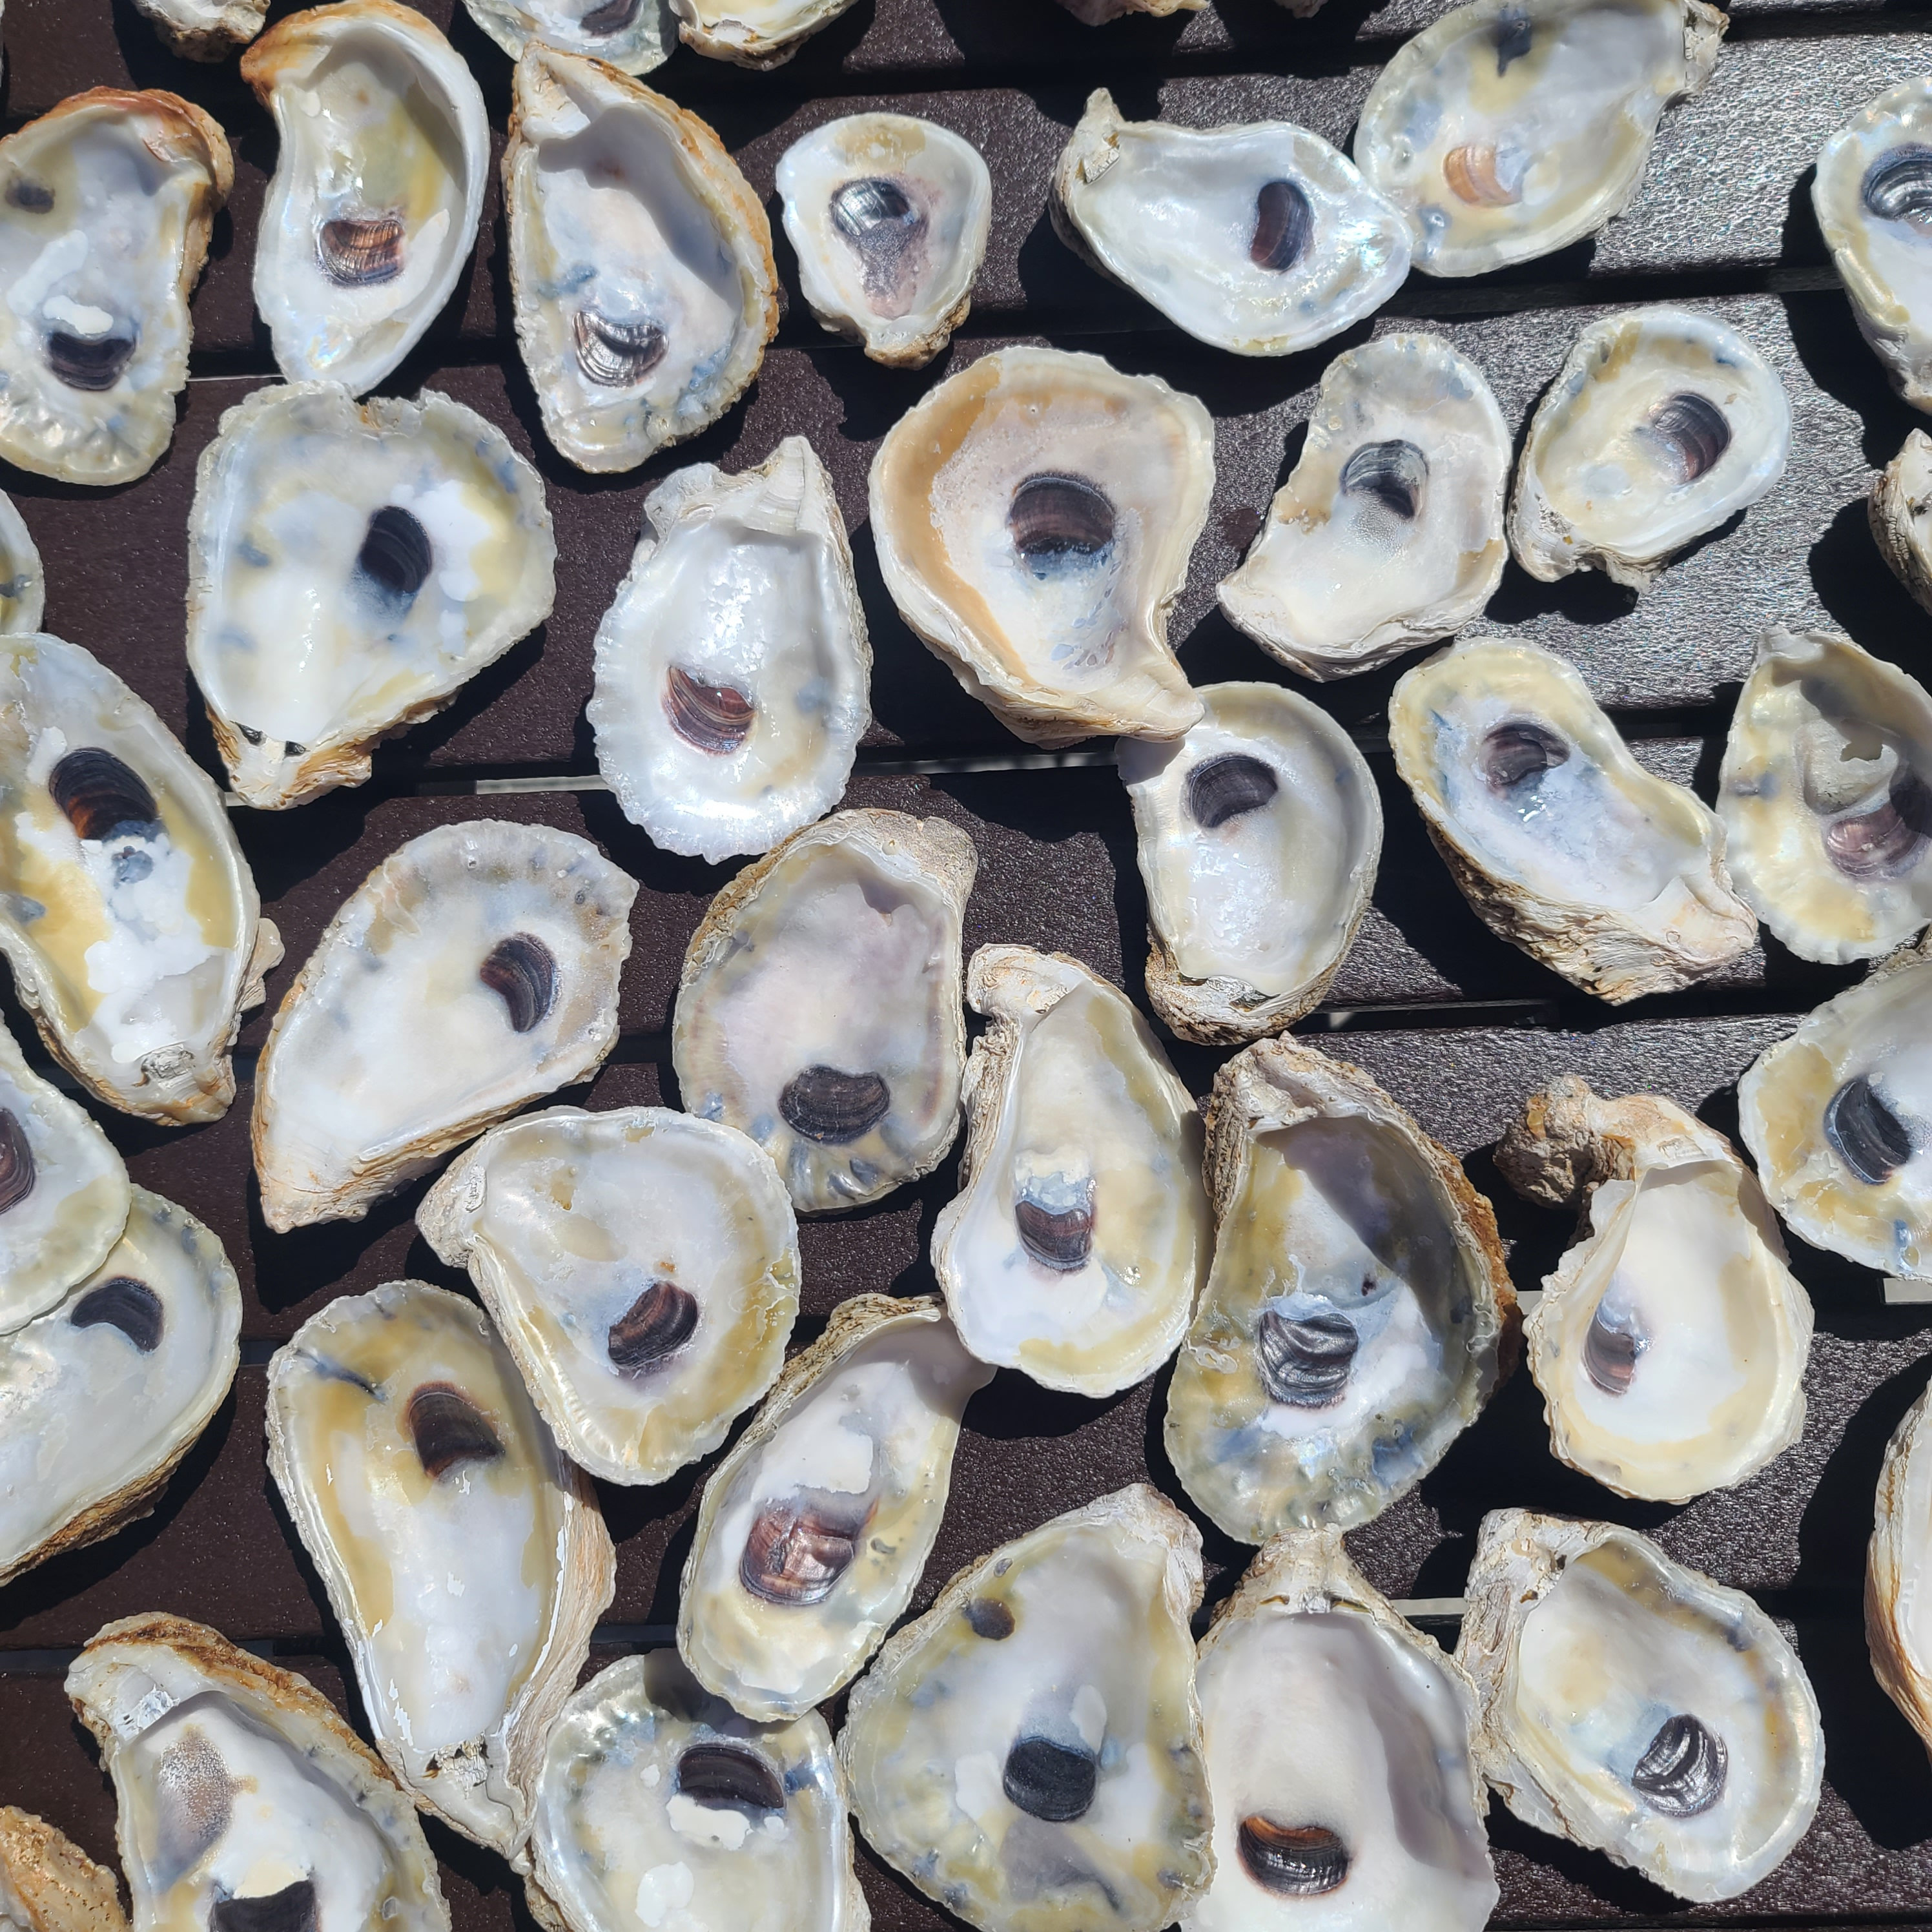 Mixed Bag of Oyster Shells 3-4 Inch 